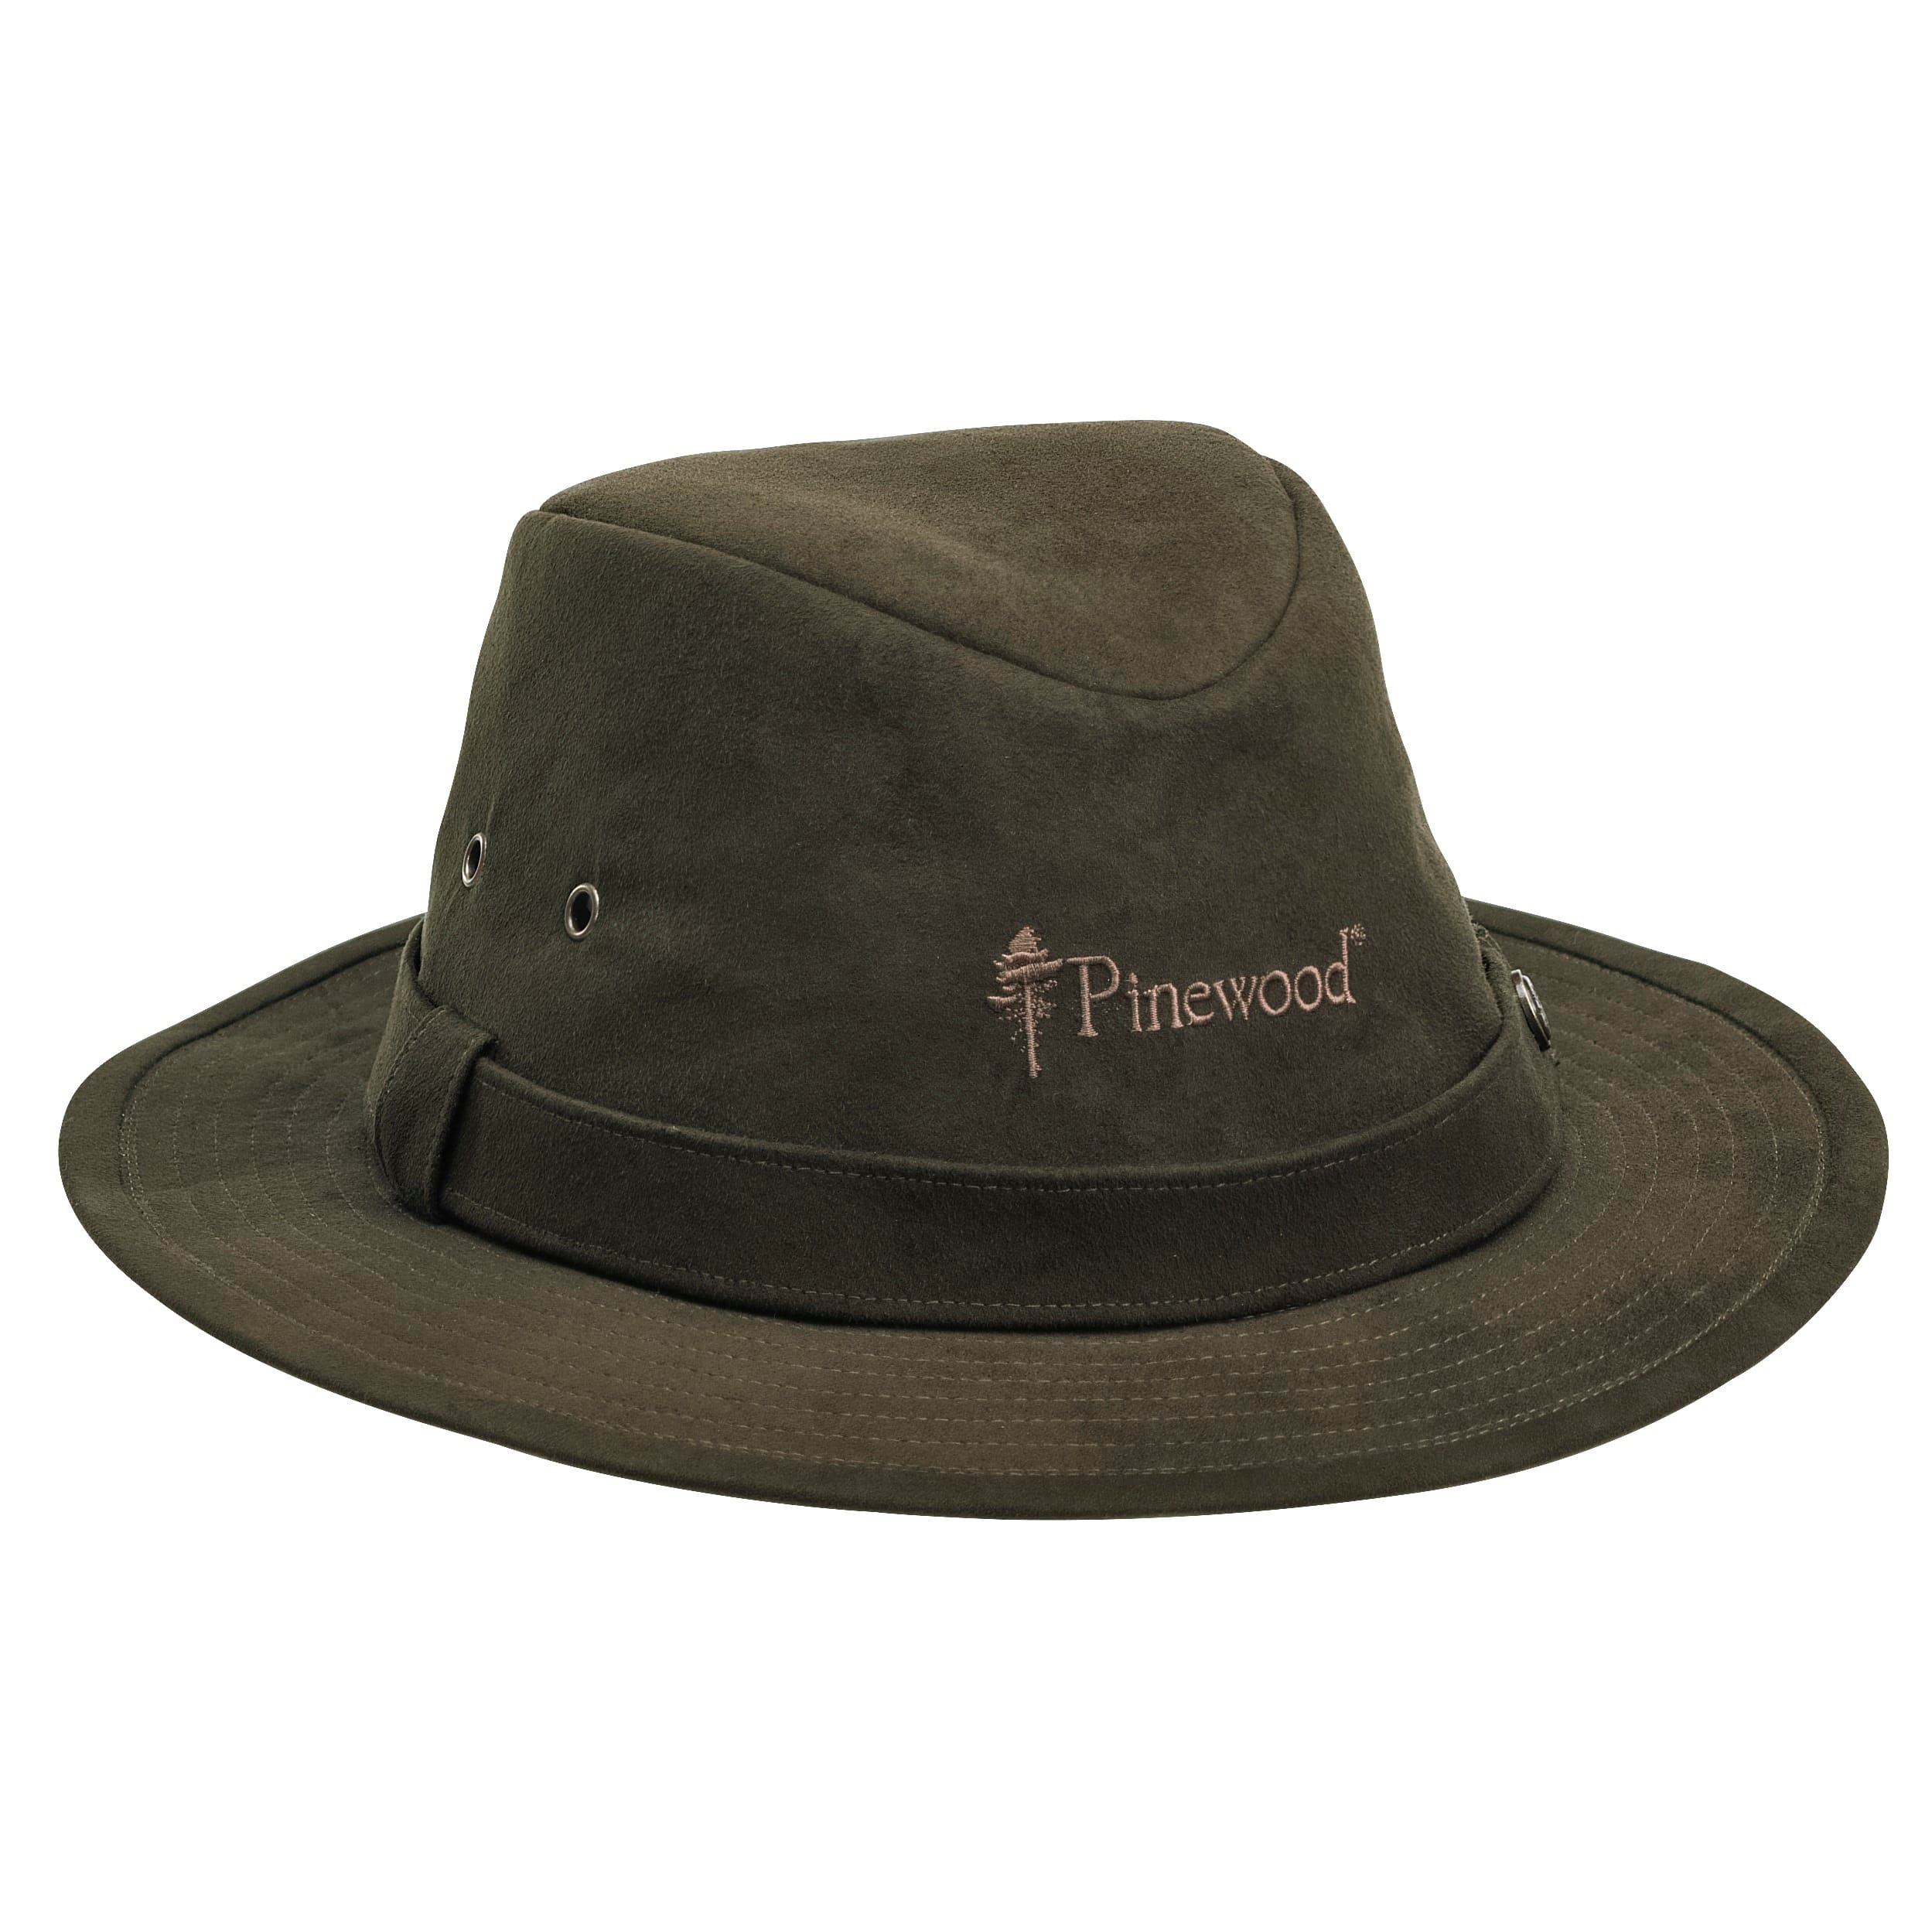 Buy Pinewood Hat from Outnorth